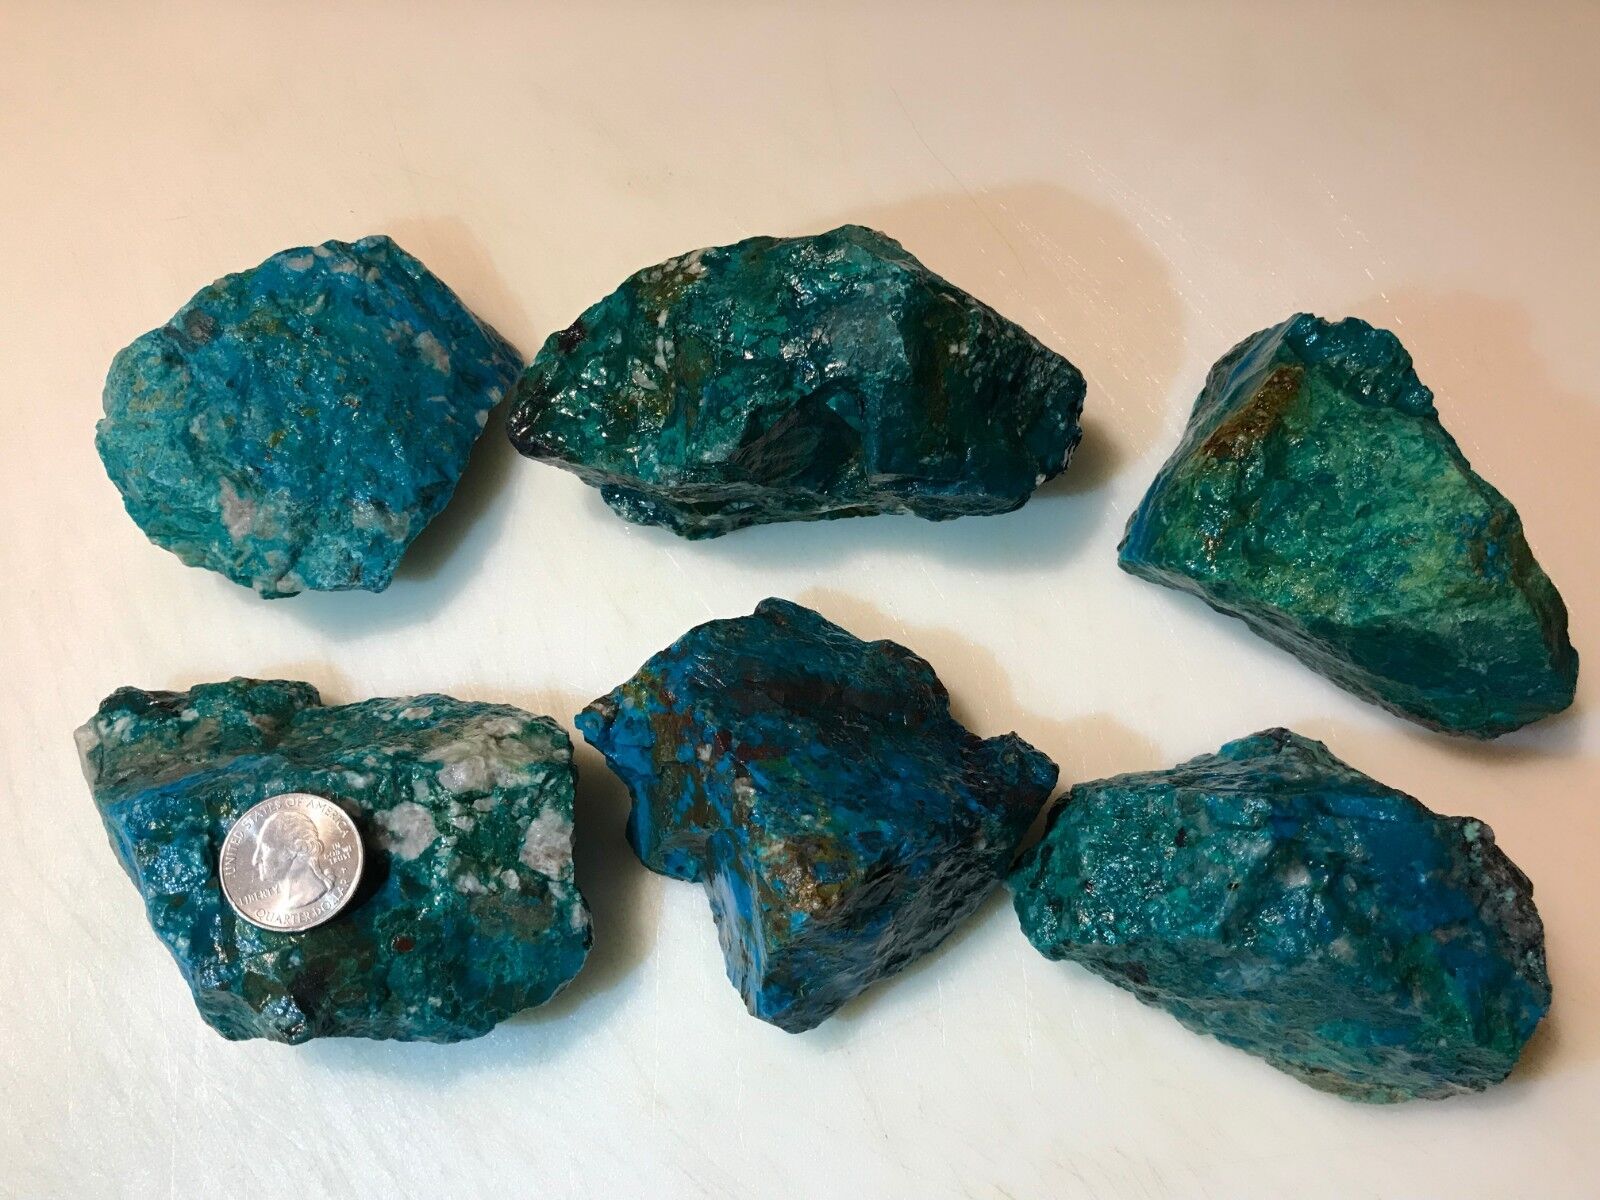 5 Pound Lots of  ALL NATURAL Chrysocolla & Turquoise Rough (Large Pieces) (WET) Без бренда - фотография #4